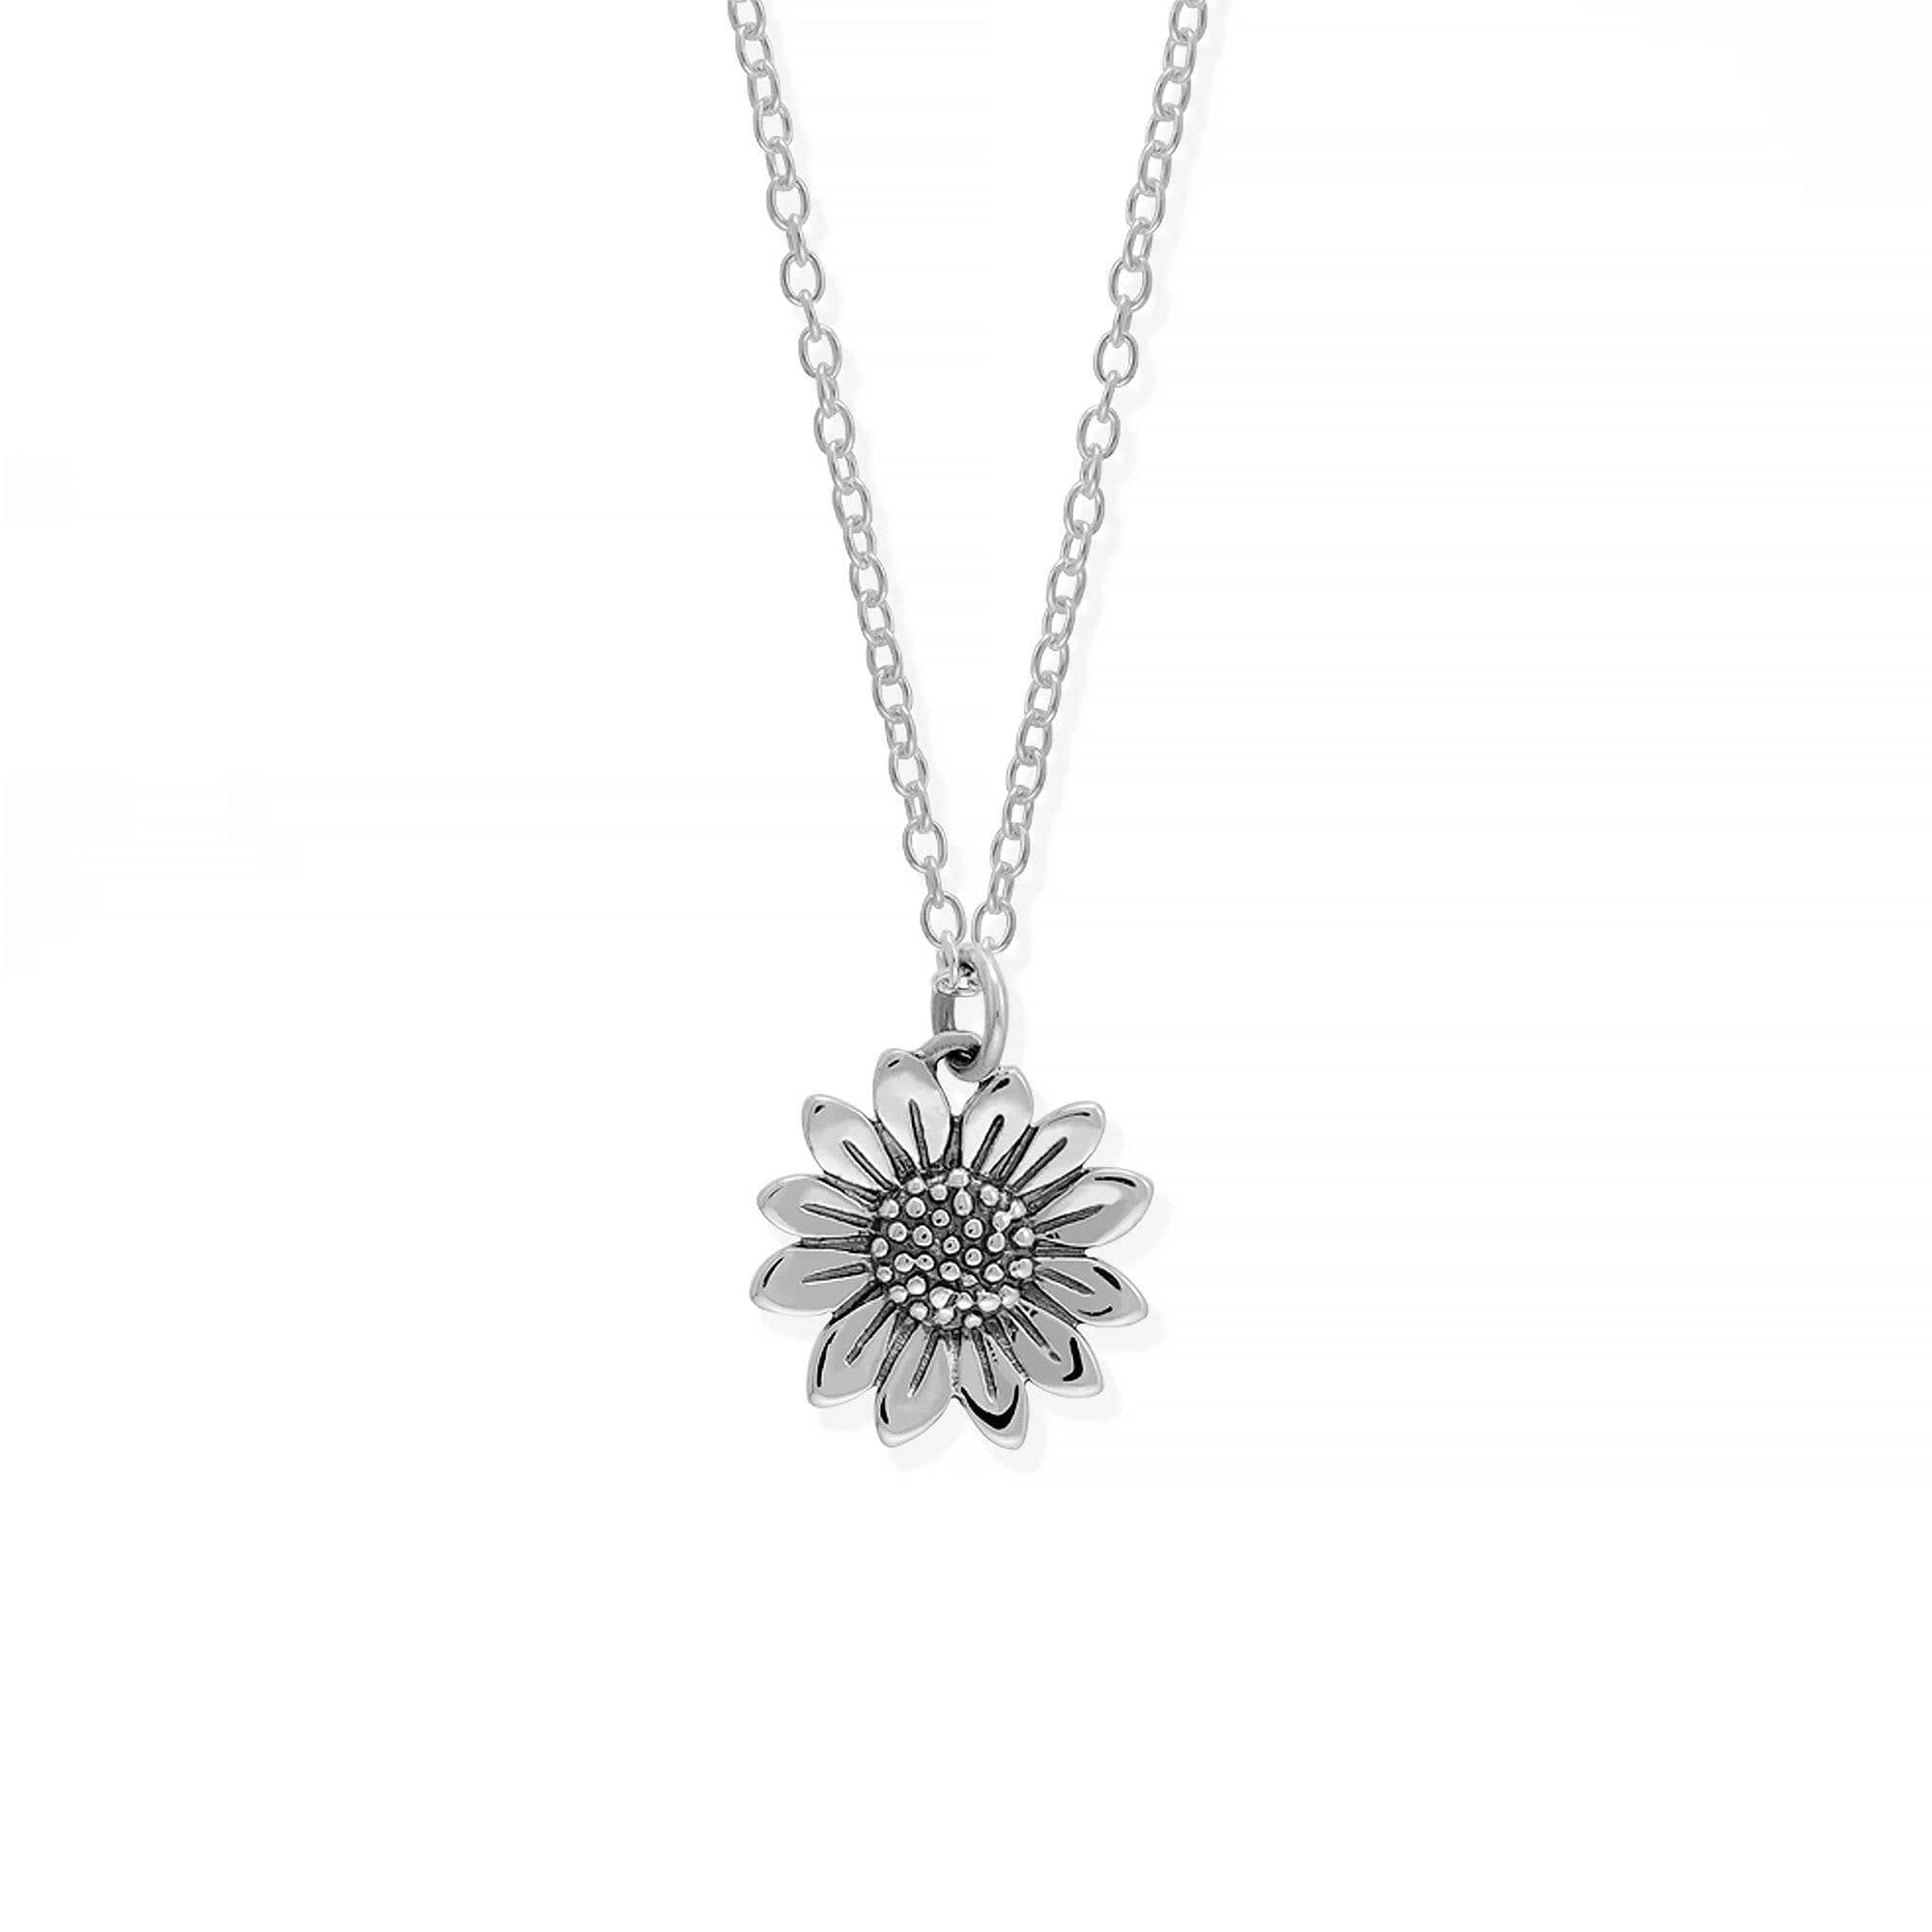 Boma Jewelry Necklaces Sunflower Necklace